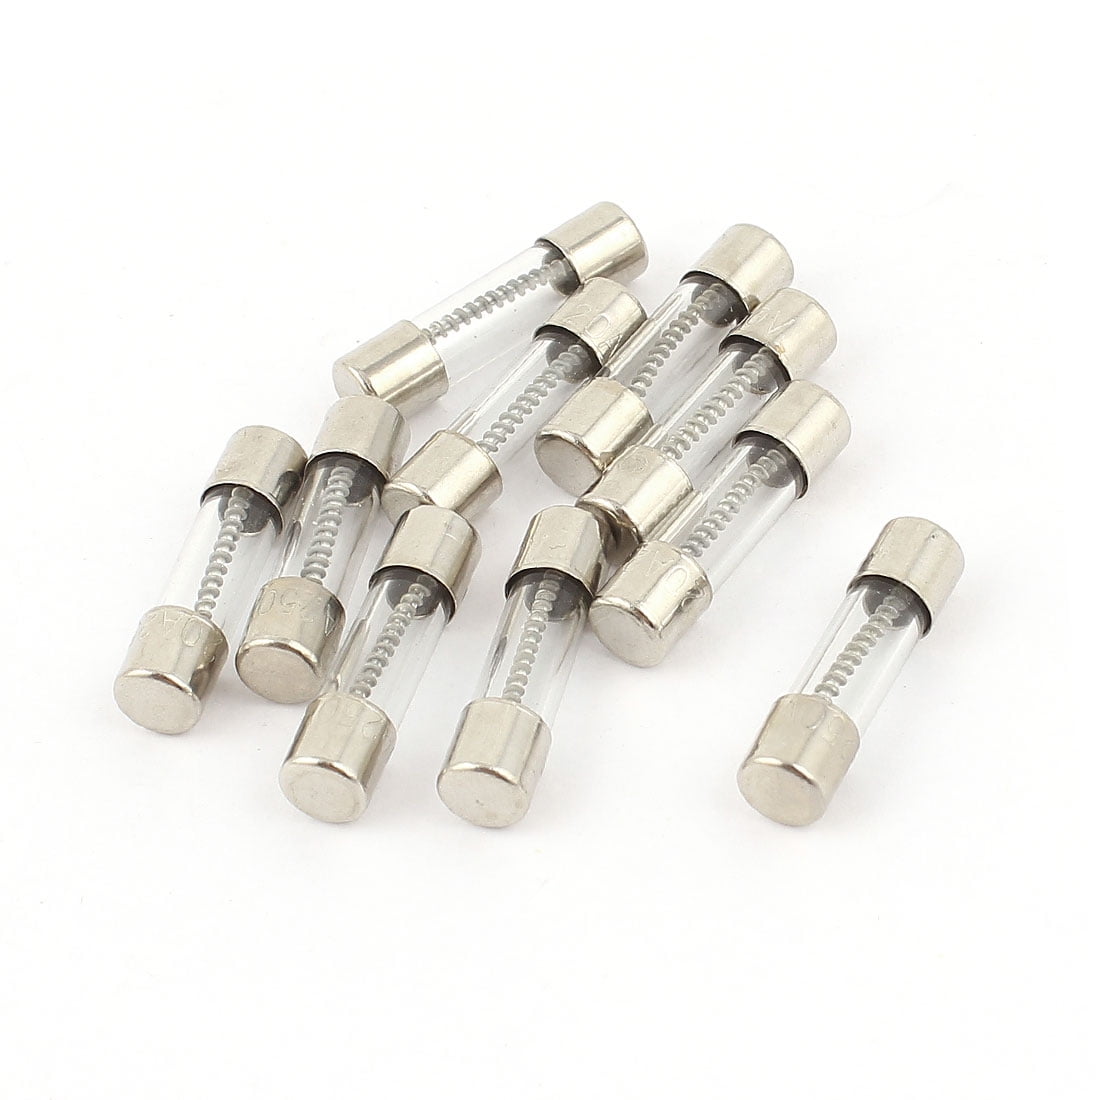 10 x 4A 20mm Glass Time Delay Slow Blow Fuse 